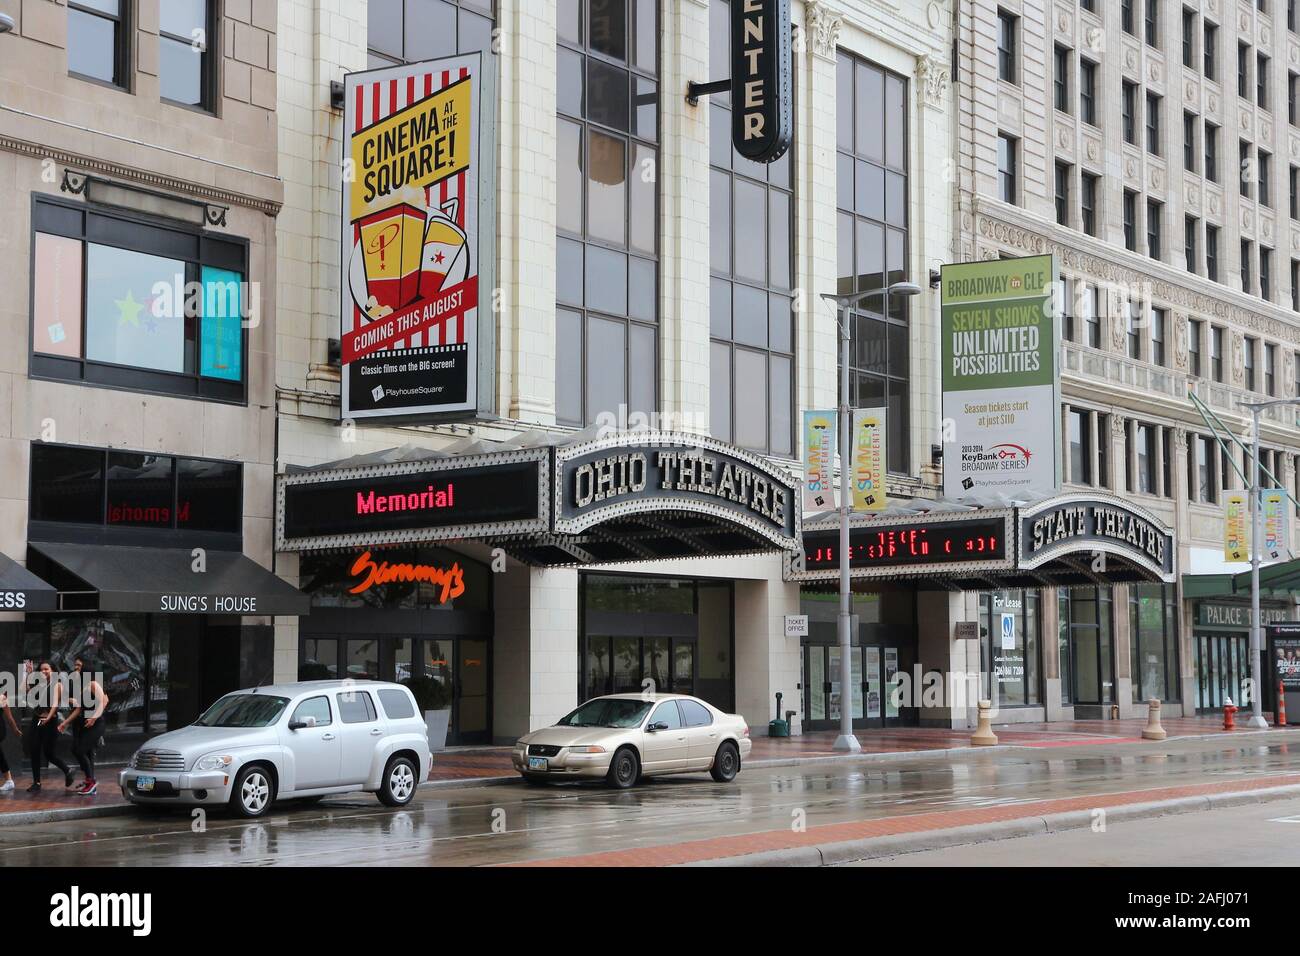 CLEVELAND, USA - JUNE 29, 2013: People visit theatres of Euclid Avenue in Cleveland. Cleveland is the 2nd largest urban area in Ohio with more than 2 Stock Photo